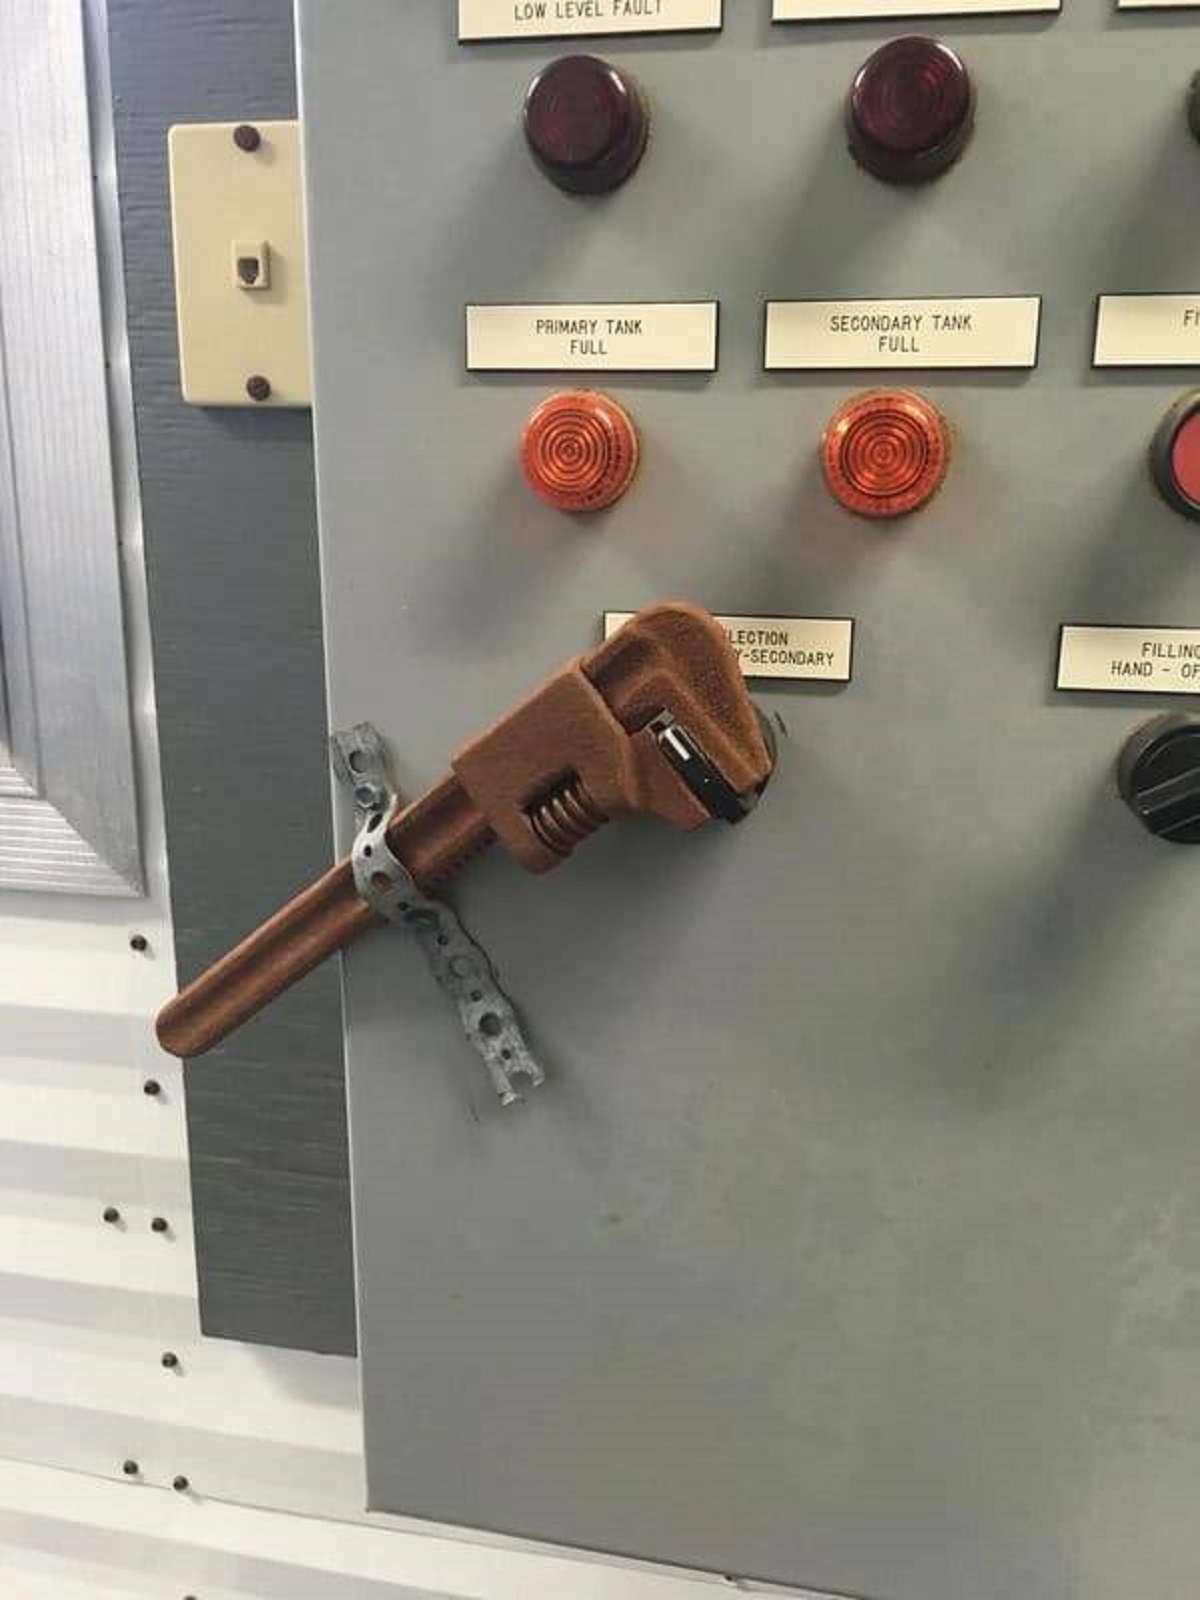 “New lock out procedure”